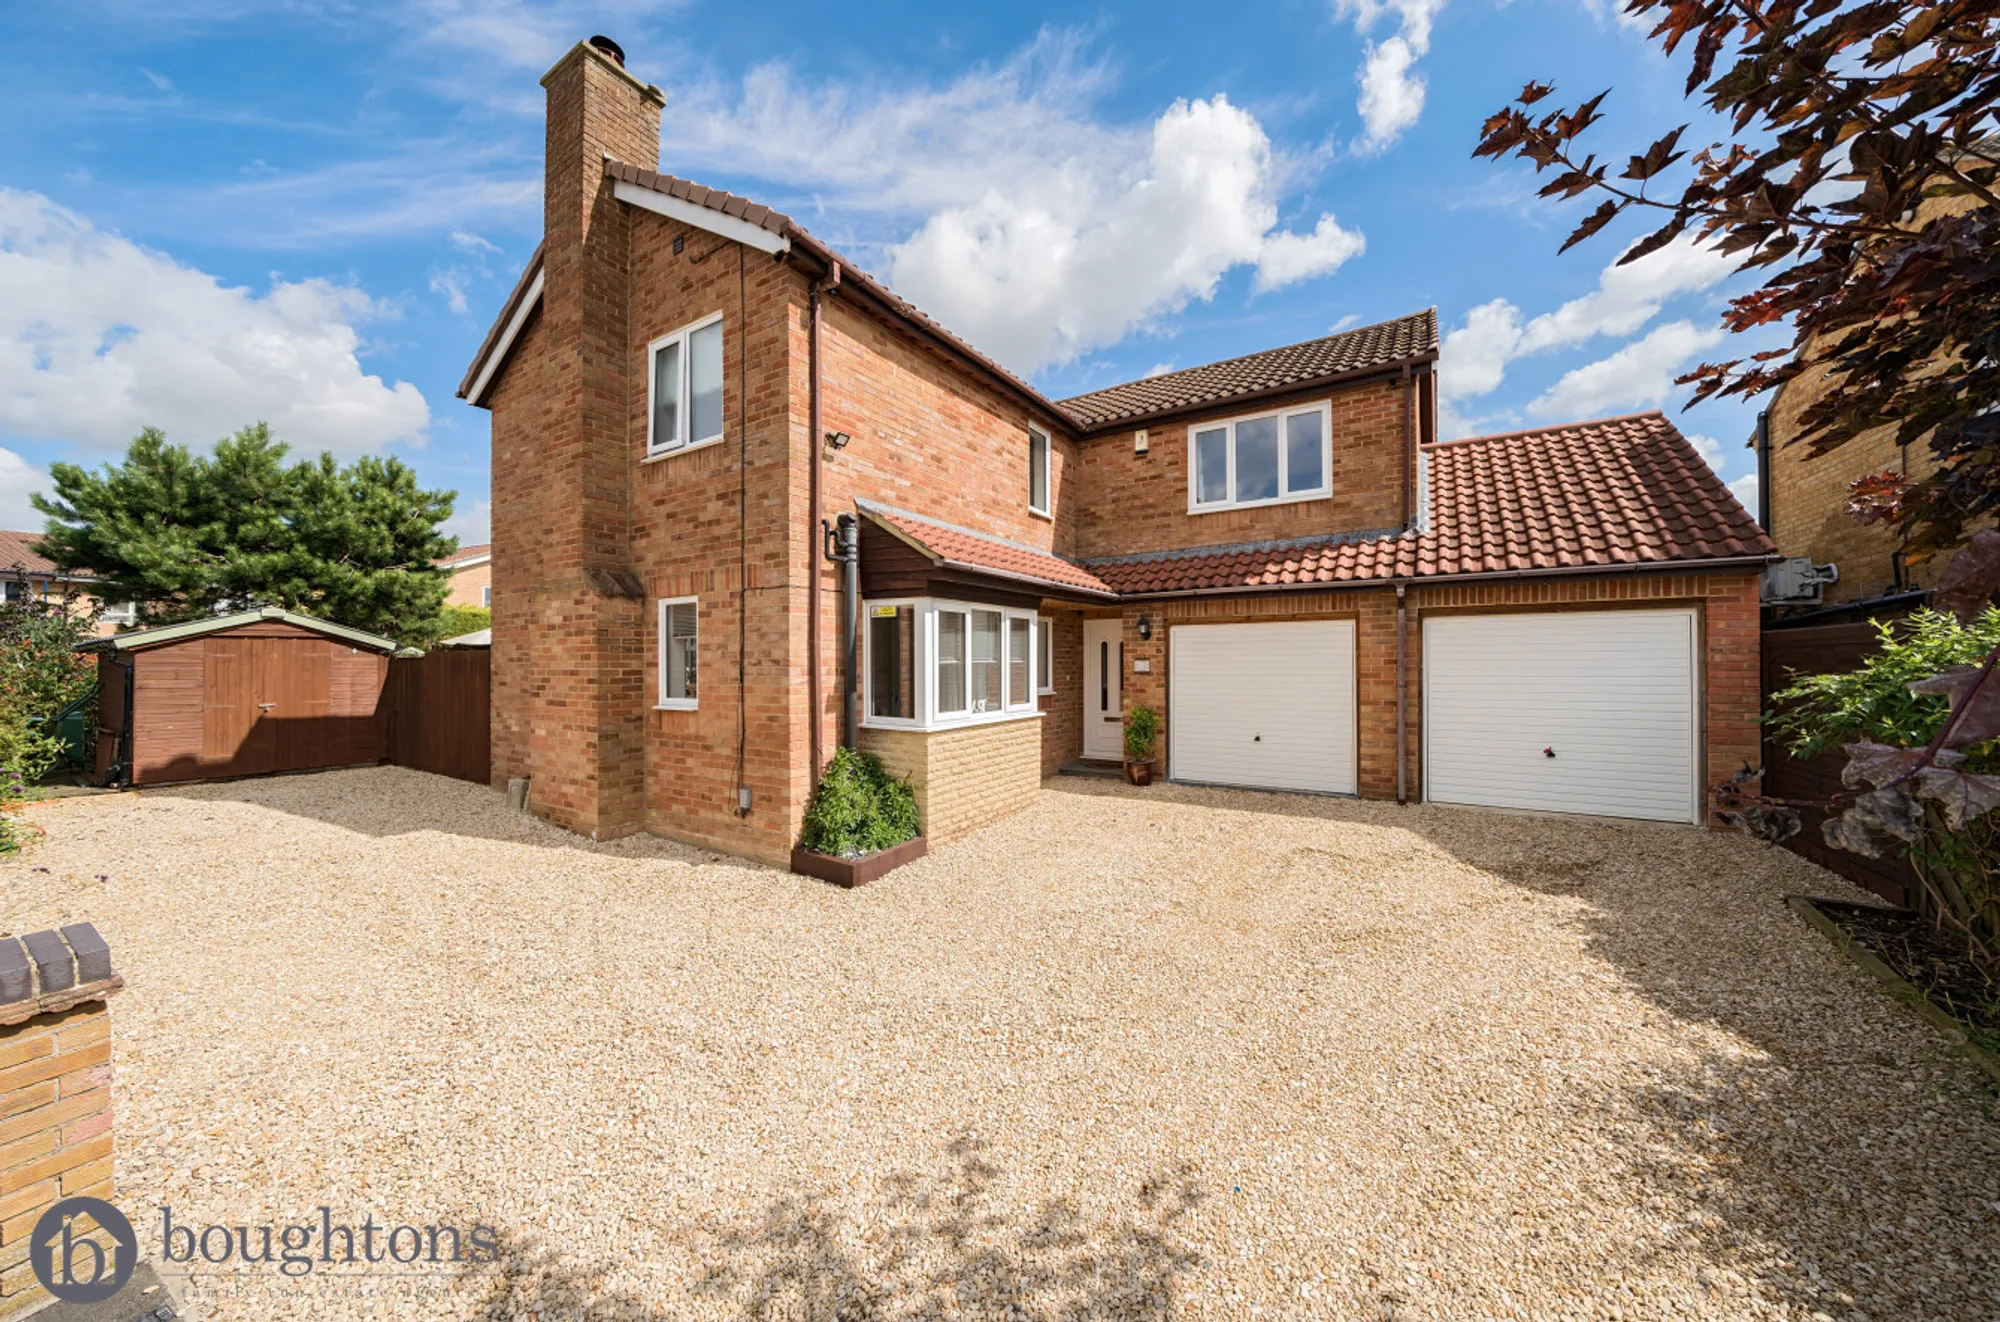 4 bed detached house for sale in Flora Thompson Drive, Brackley  - Property Image 1